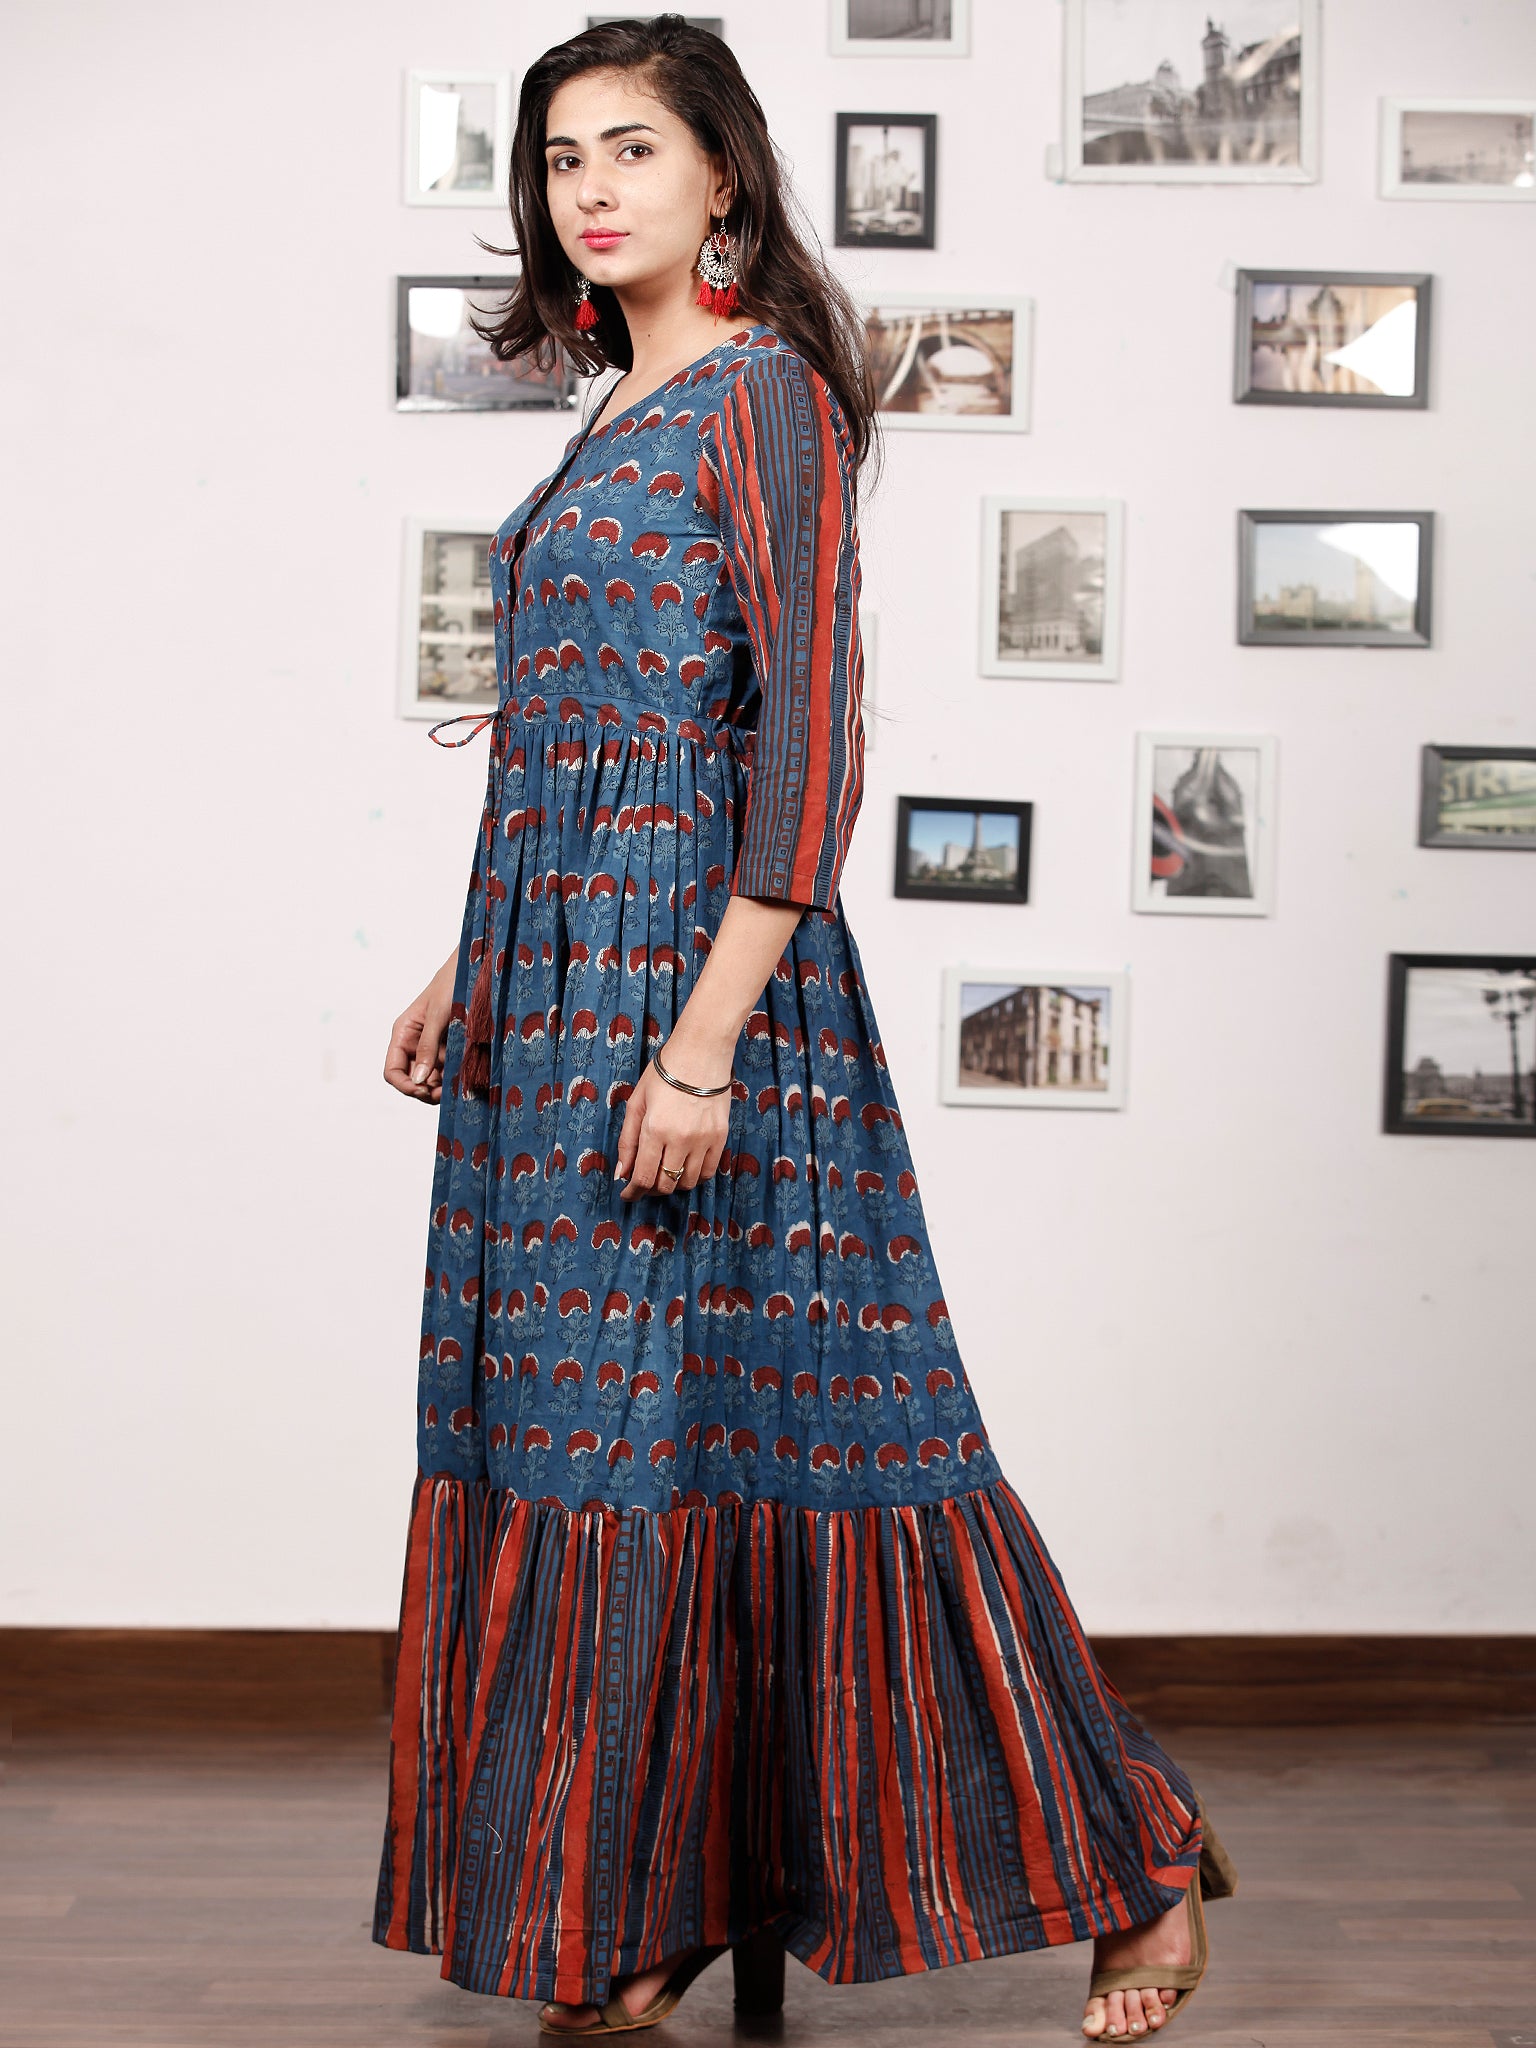 TRENDY RUSSET - Hand Block Printed Cotton Long Dress With Tie Up Waist ...